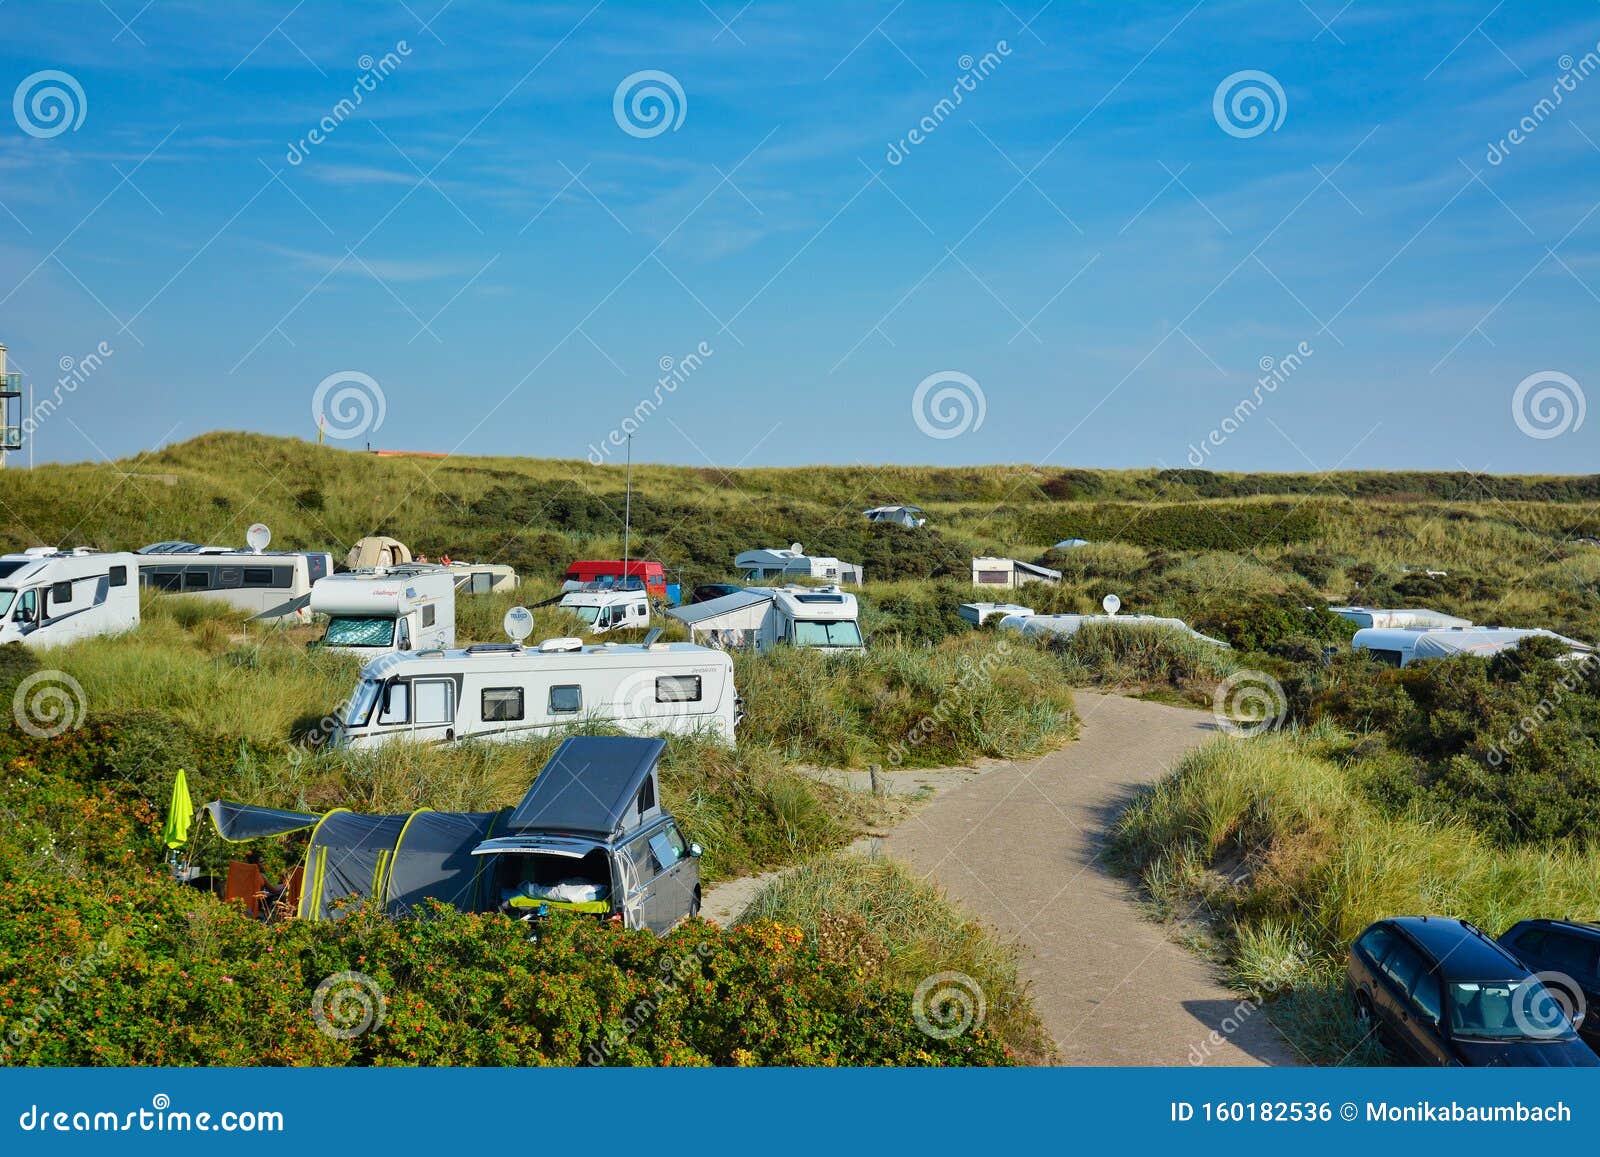 Camping Site Called `Kogerstrand` with Big Cars and Camper Vans in the  Dunes Near Beach Onisland Texel Editorial Photo - Image of campsite,  trailer: 160182536